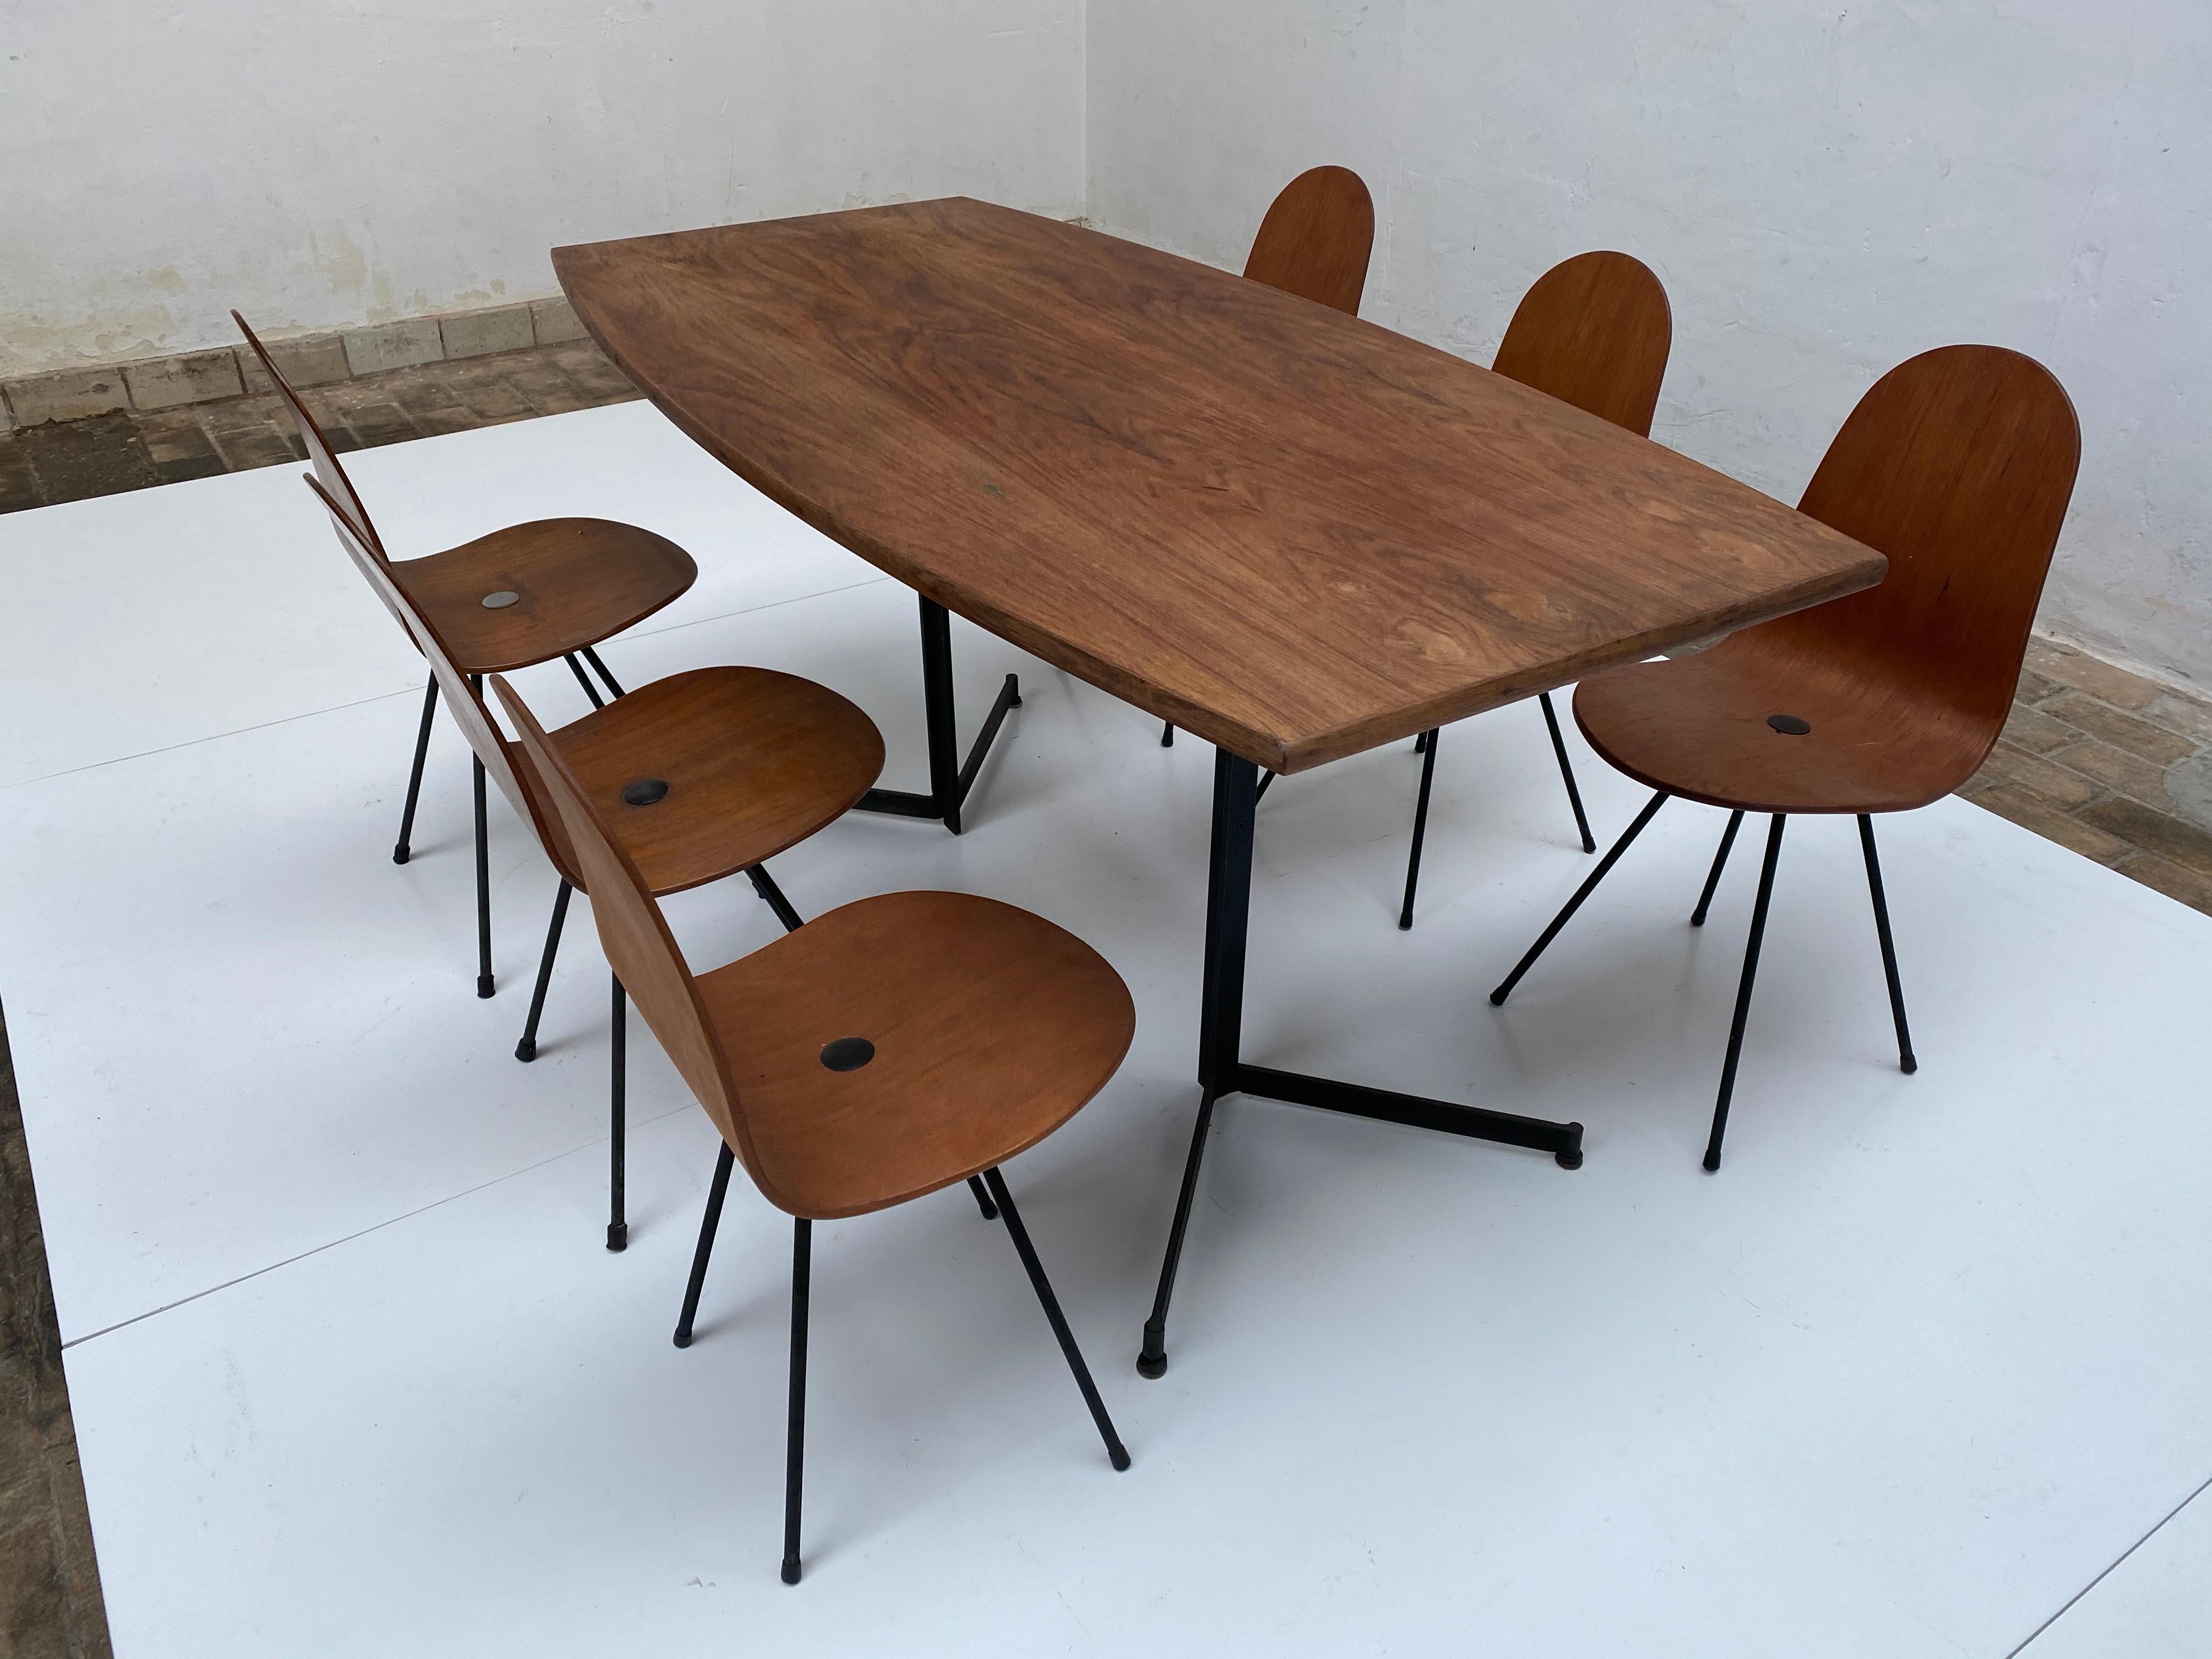 Italian Campo & Graffi Dining Set Comprising 6 Chairs & Matching Table, 1958, published